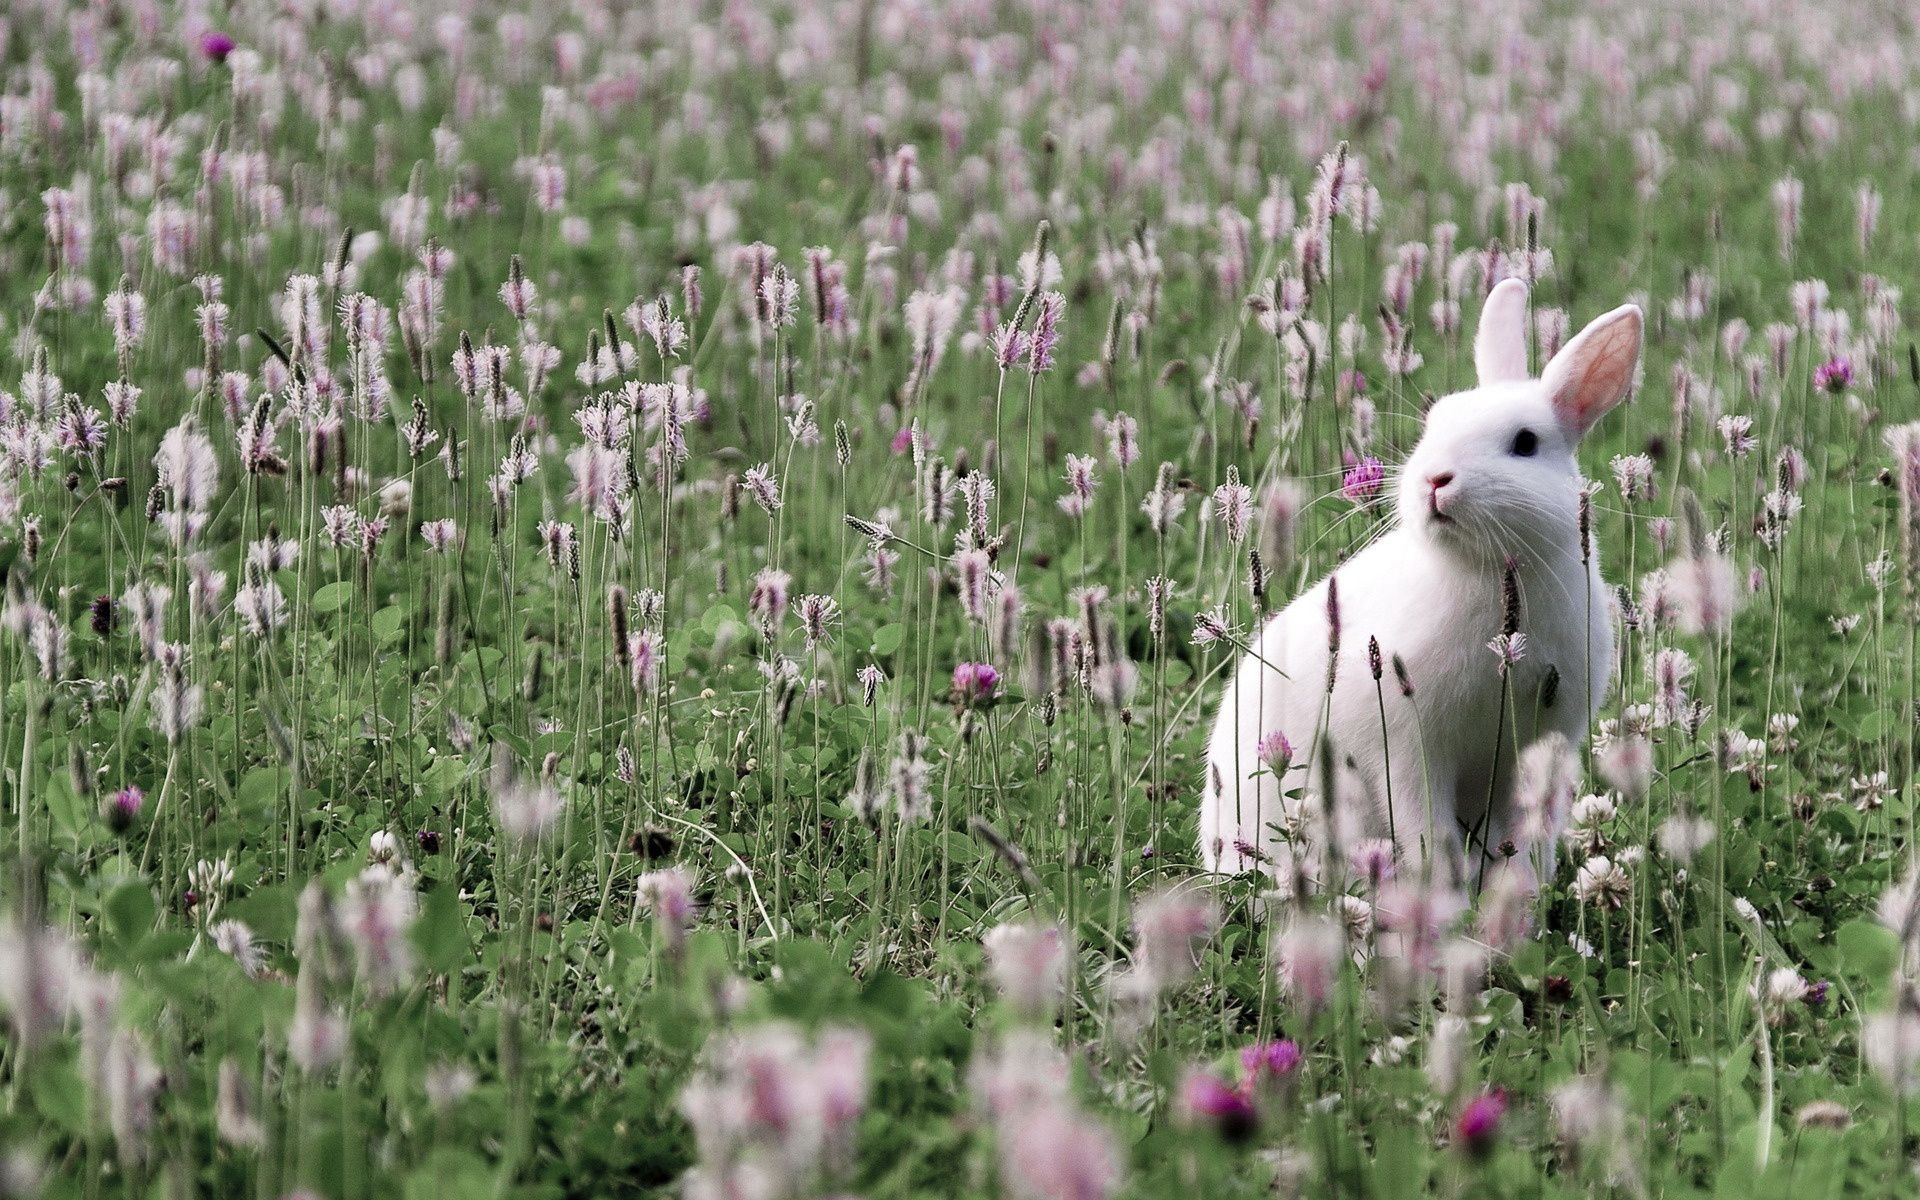 Hare in field, Grass and flower, Free HD wallpapers, Animals in nature, 1920x1200 HD Desktop